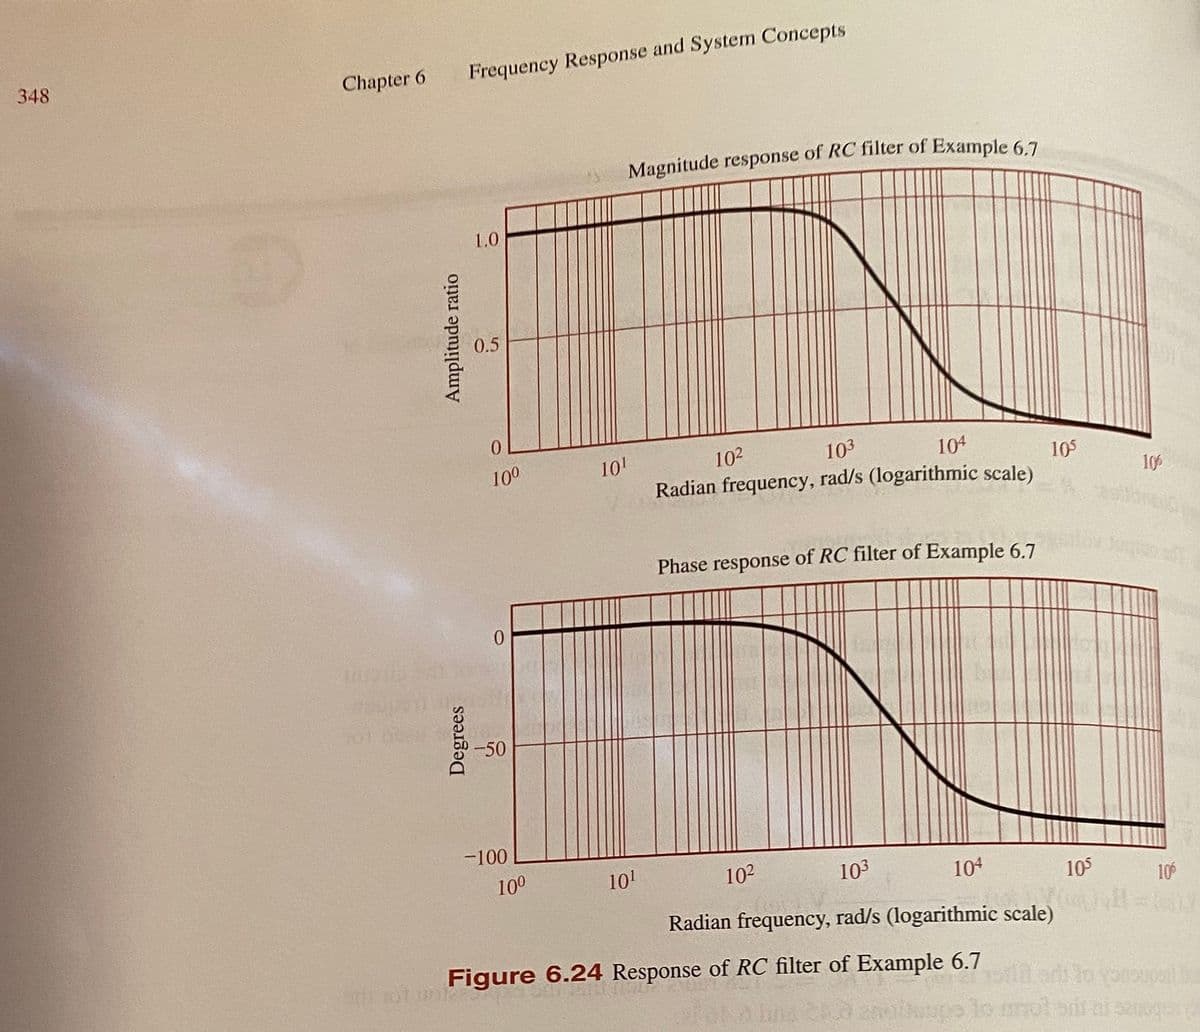 348
Frequency Response and System Concepts
Chapter 6
1.0
0.5
102
104
10
Radian frequency, rad/s (logarithmic scale)
100
103
105
106
Phase response
of RC filter of Example 6.7
-50
-100
100
101
102
103
104
105
10
Radian frequency, rad/s (logarithmic scale)
Figure 6.24 Response of RC filter of Example 6.7
proupal
lo mot
Degrees
